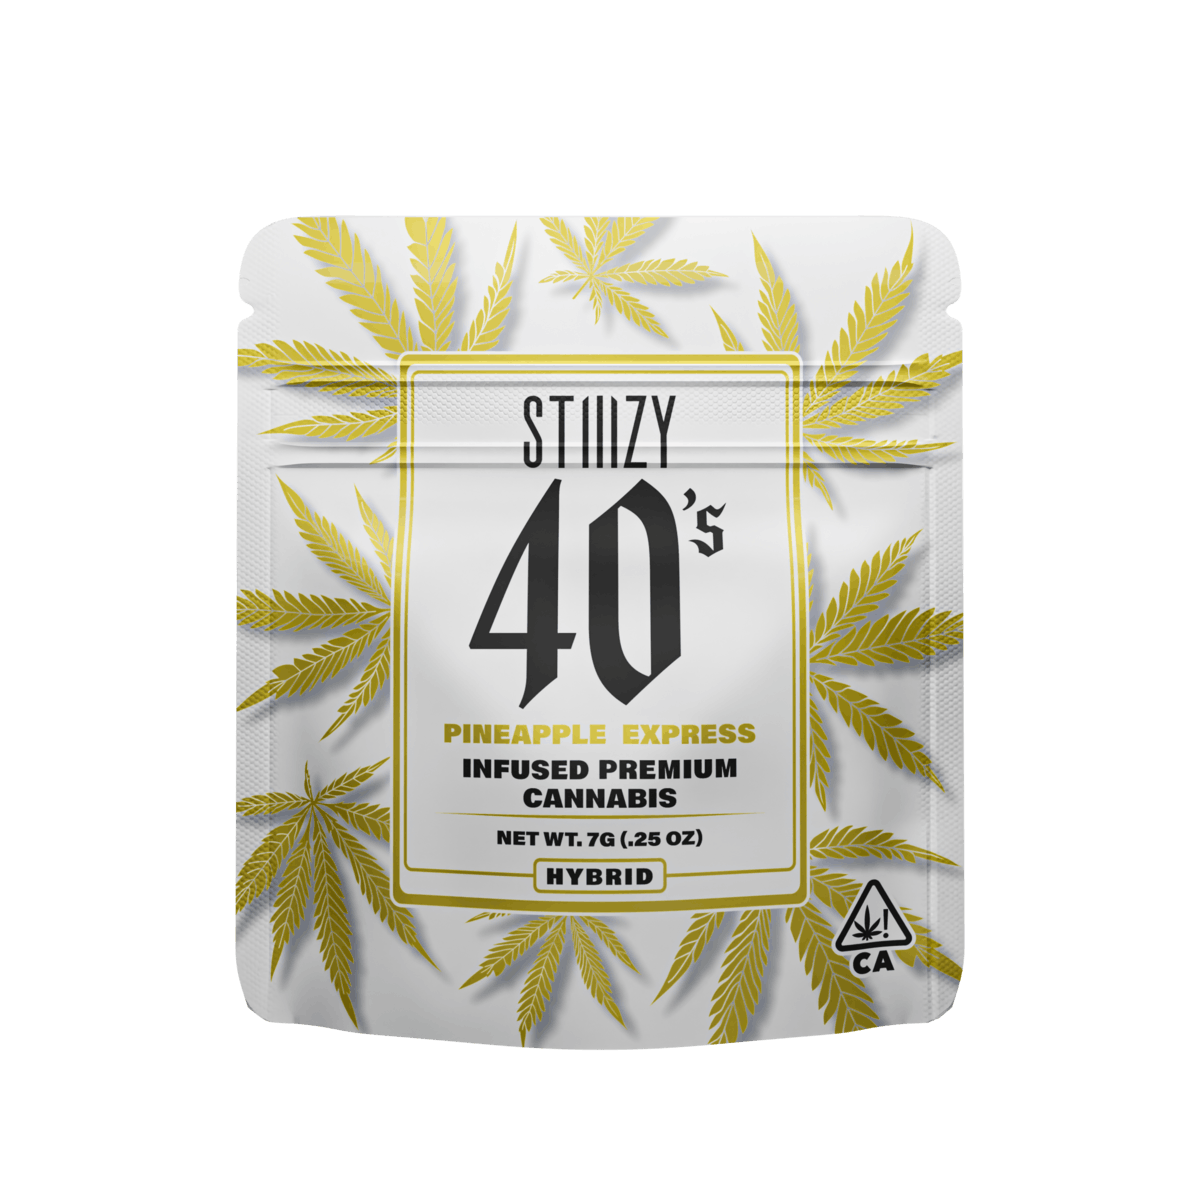 STIIIZY Infused 40s Flower - 7G Pineapple Express